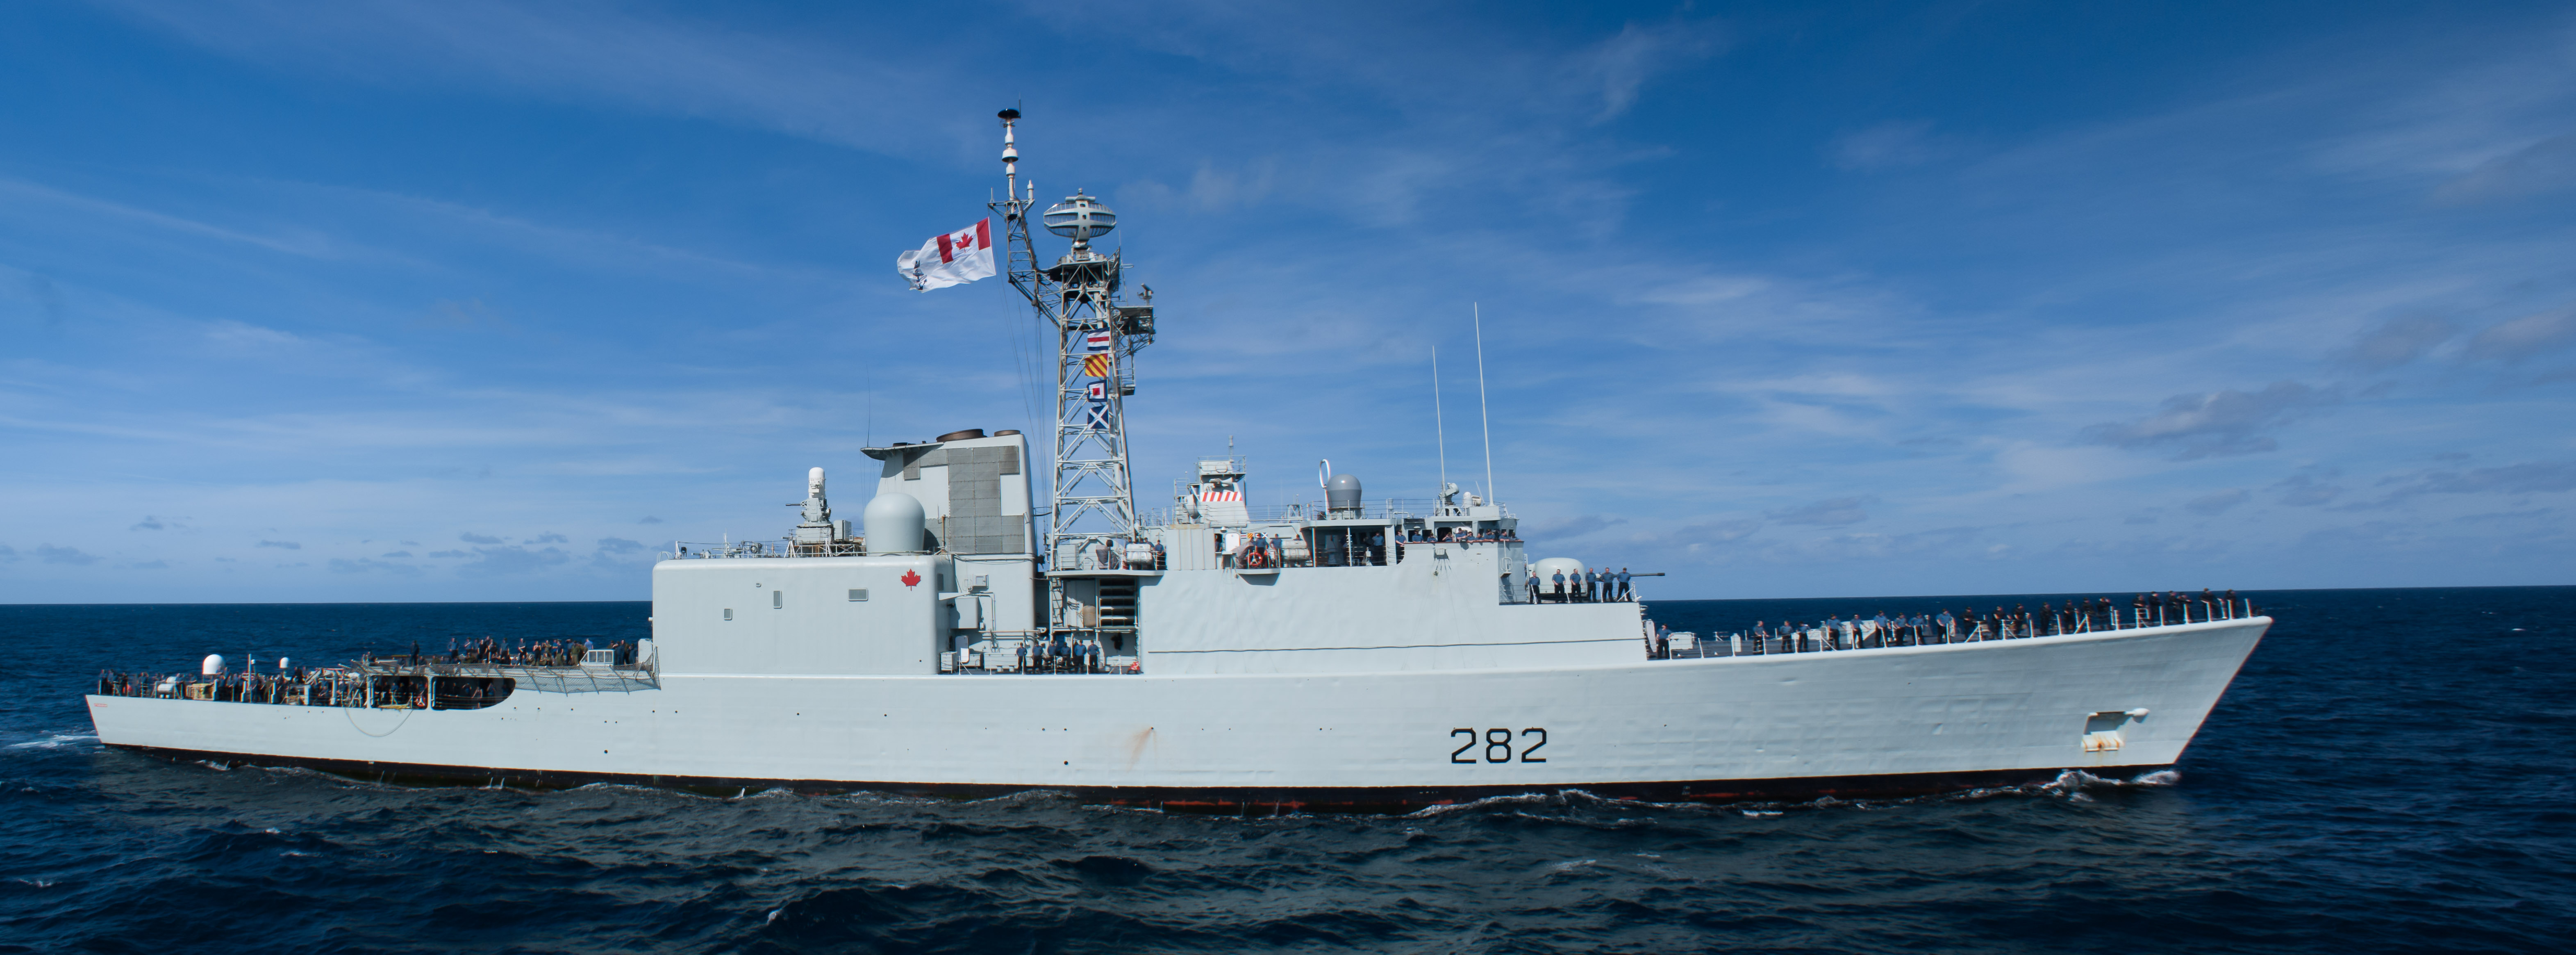 Canadian Navy - Marine Canadienne - Page 6 33079116612_84864335c7_o